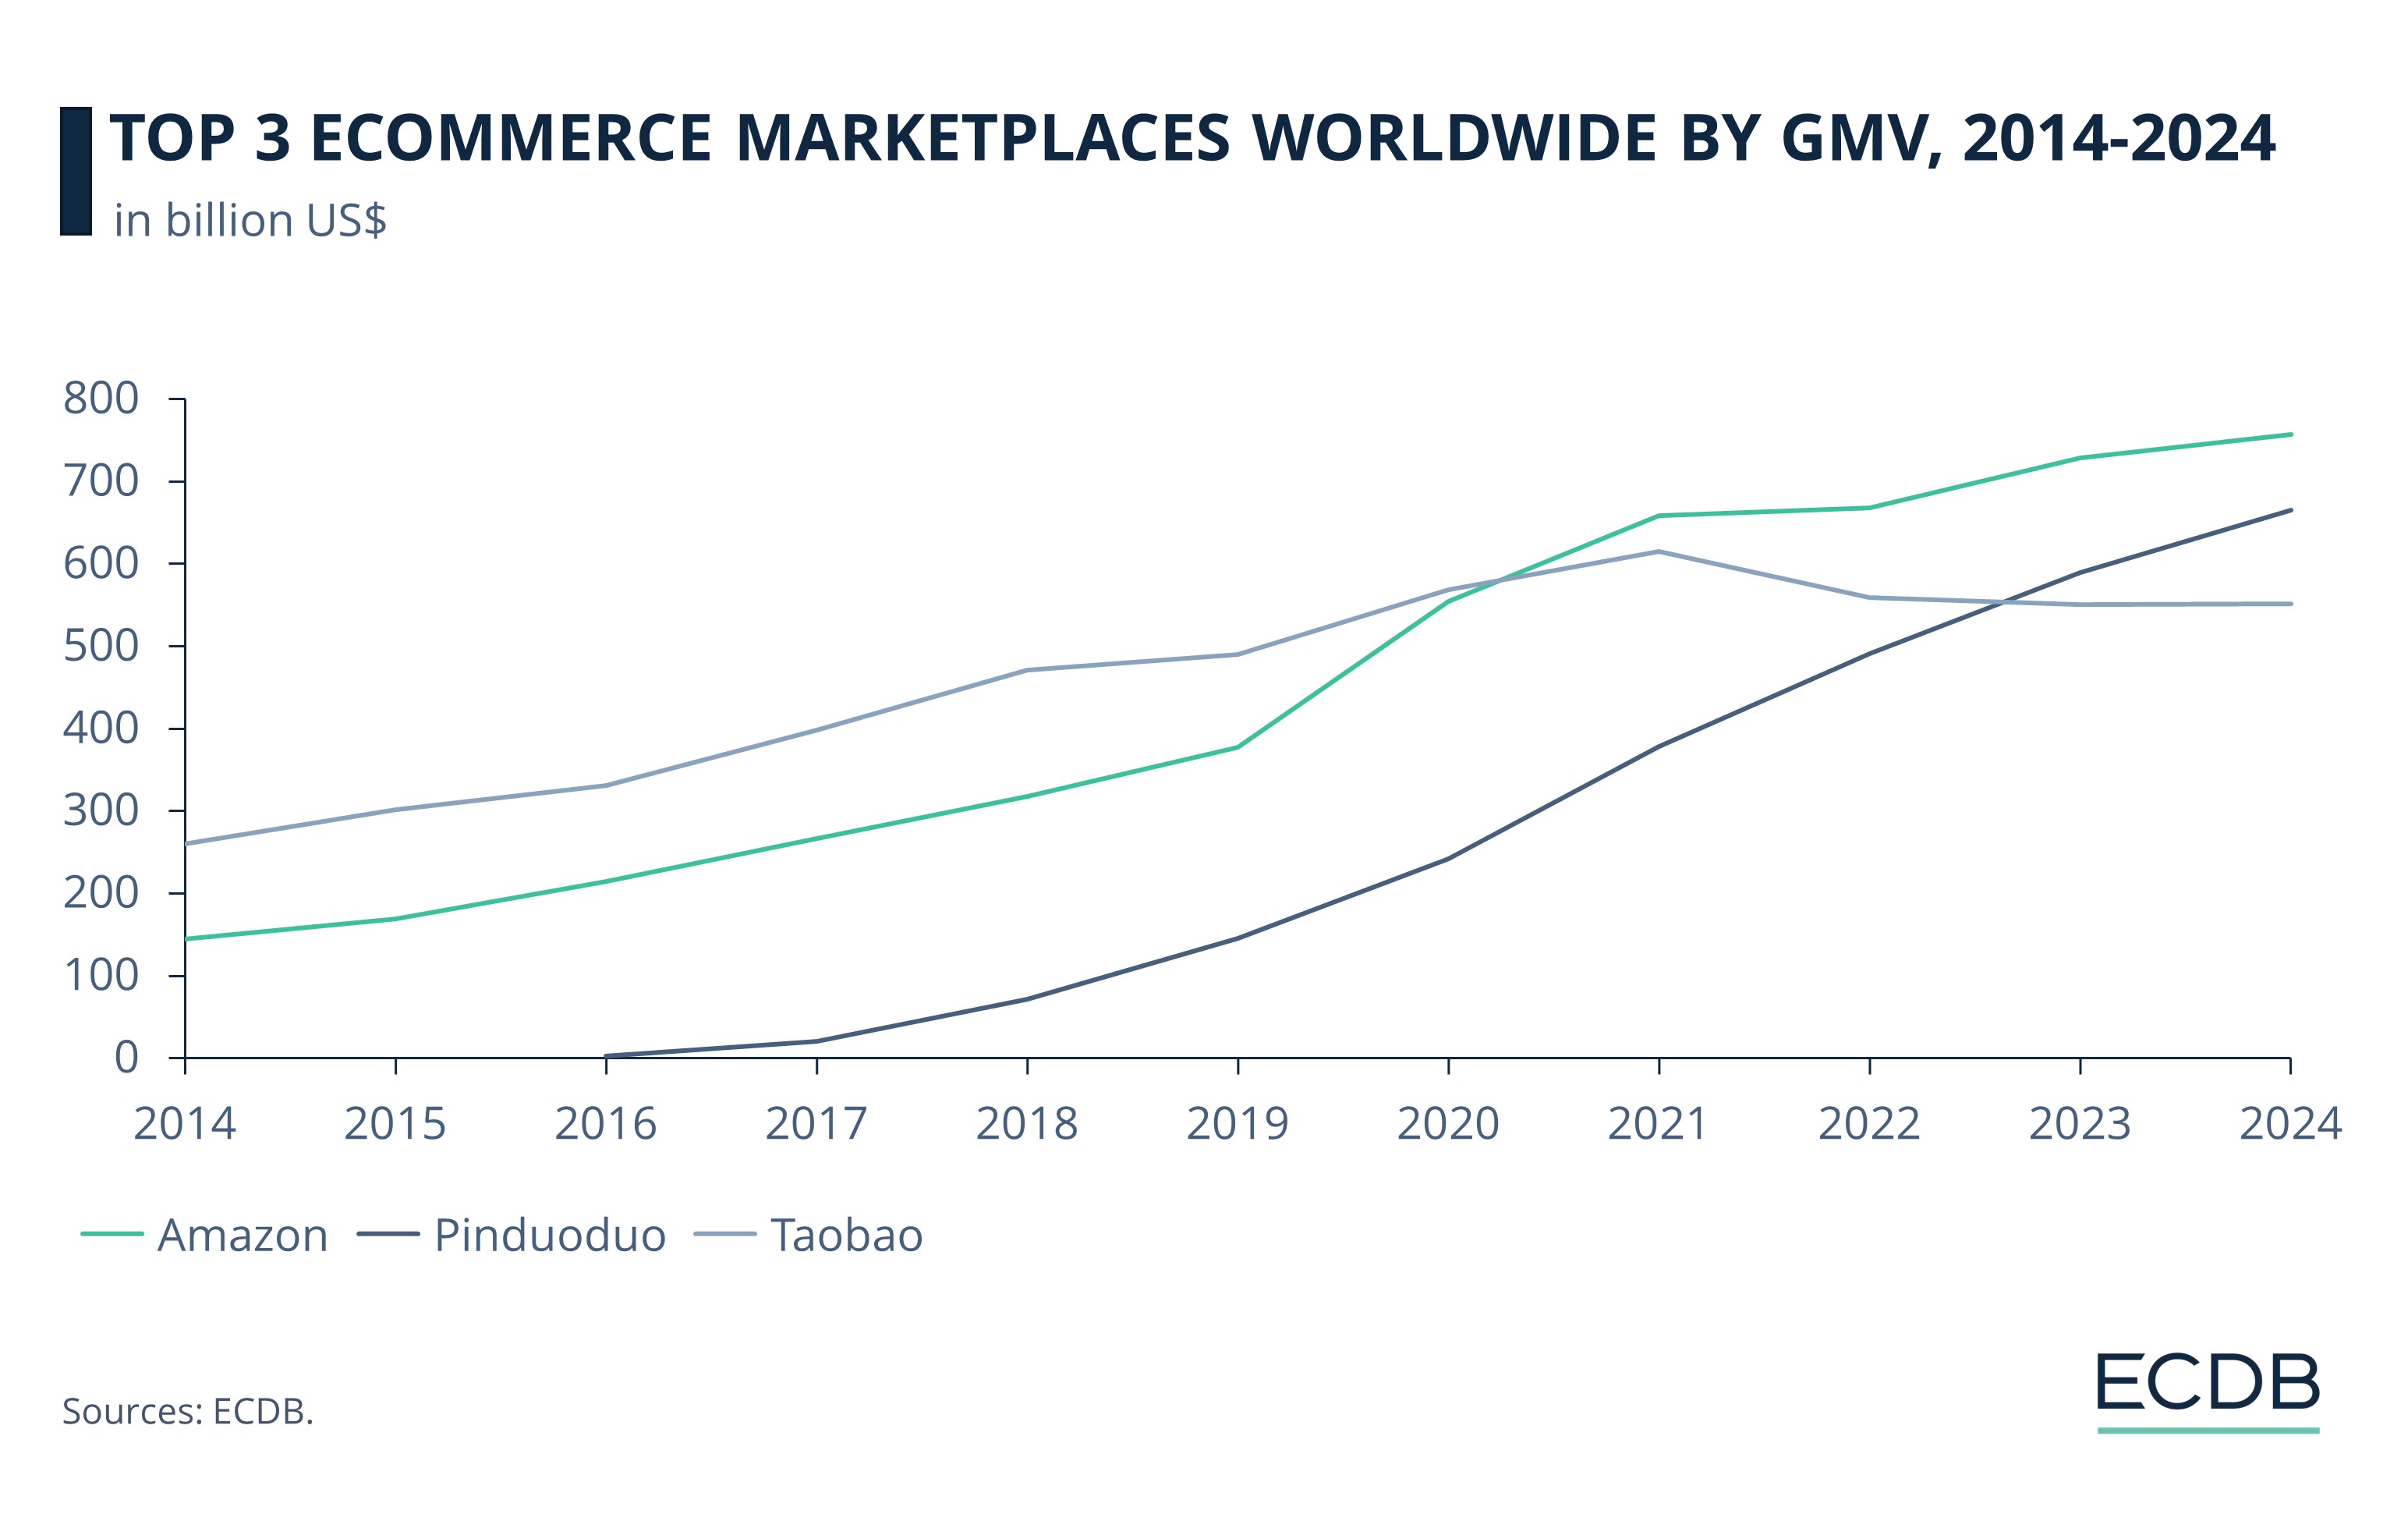 TOP ECOMMERCE MARKETPLACES WORLDWIDE BY GMV, 2014-2024